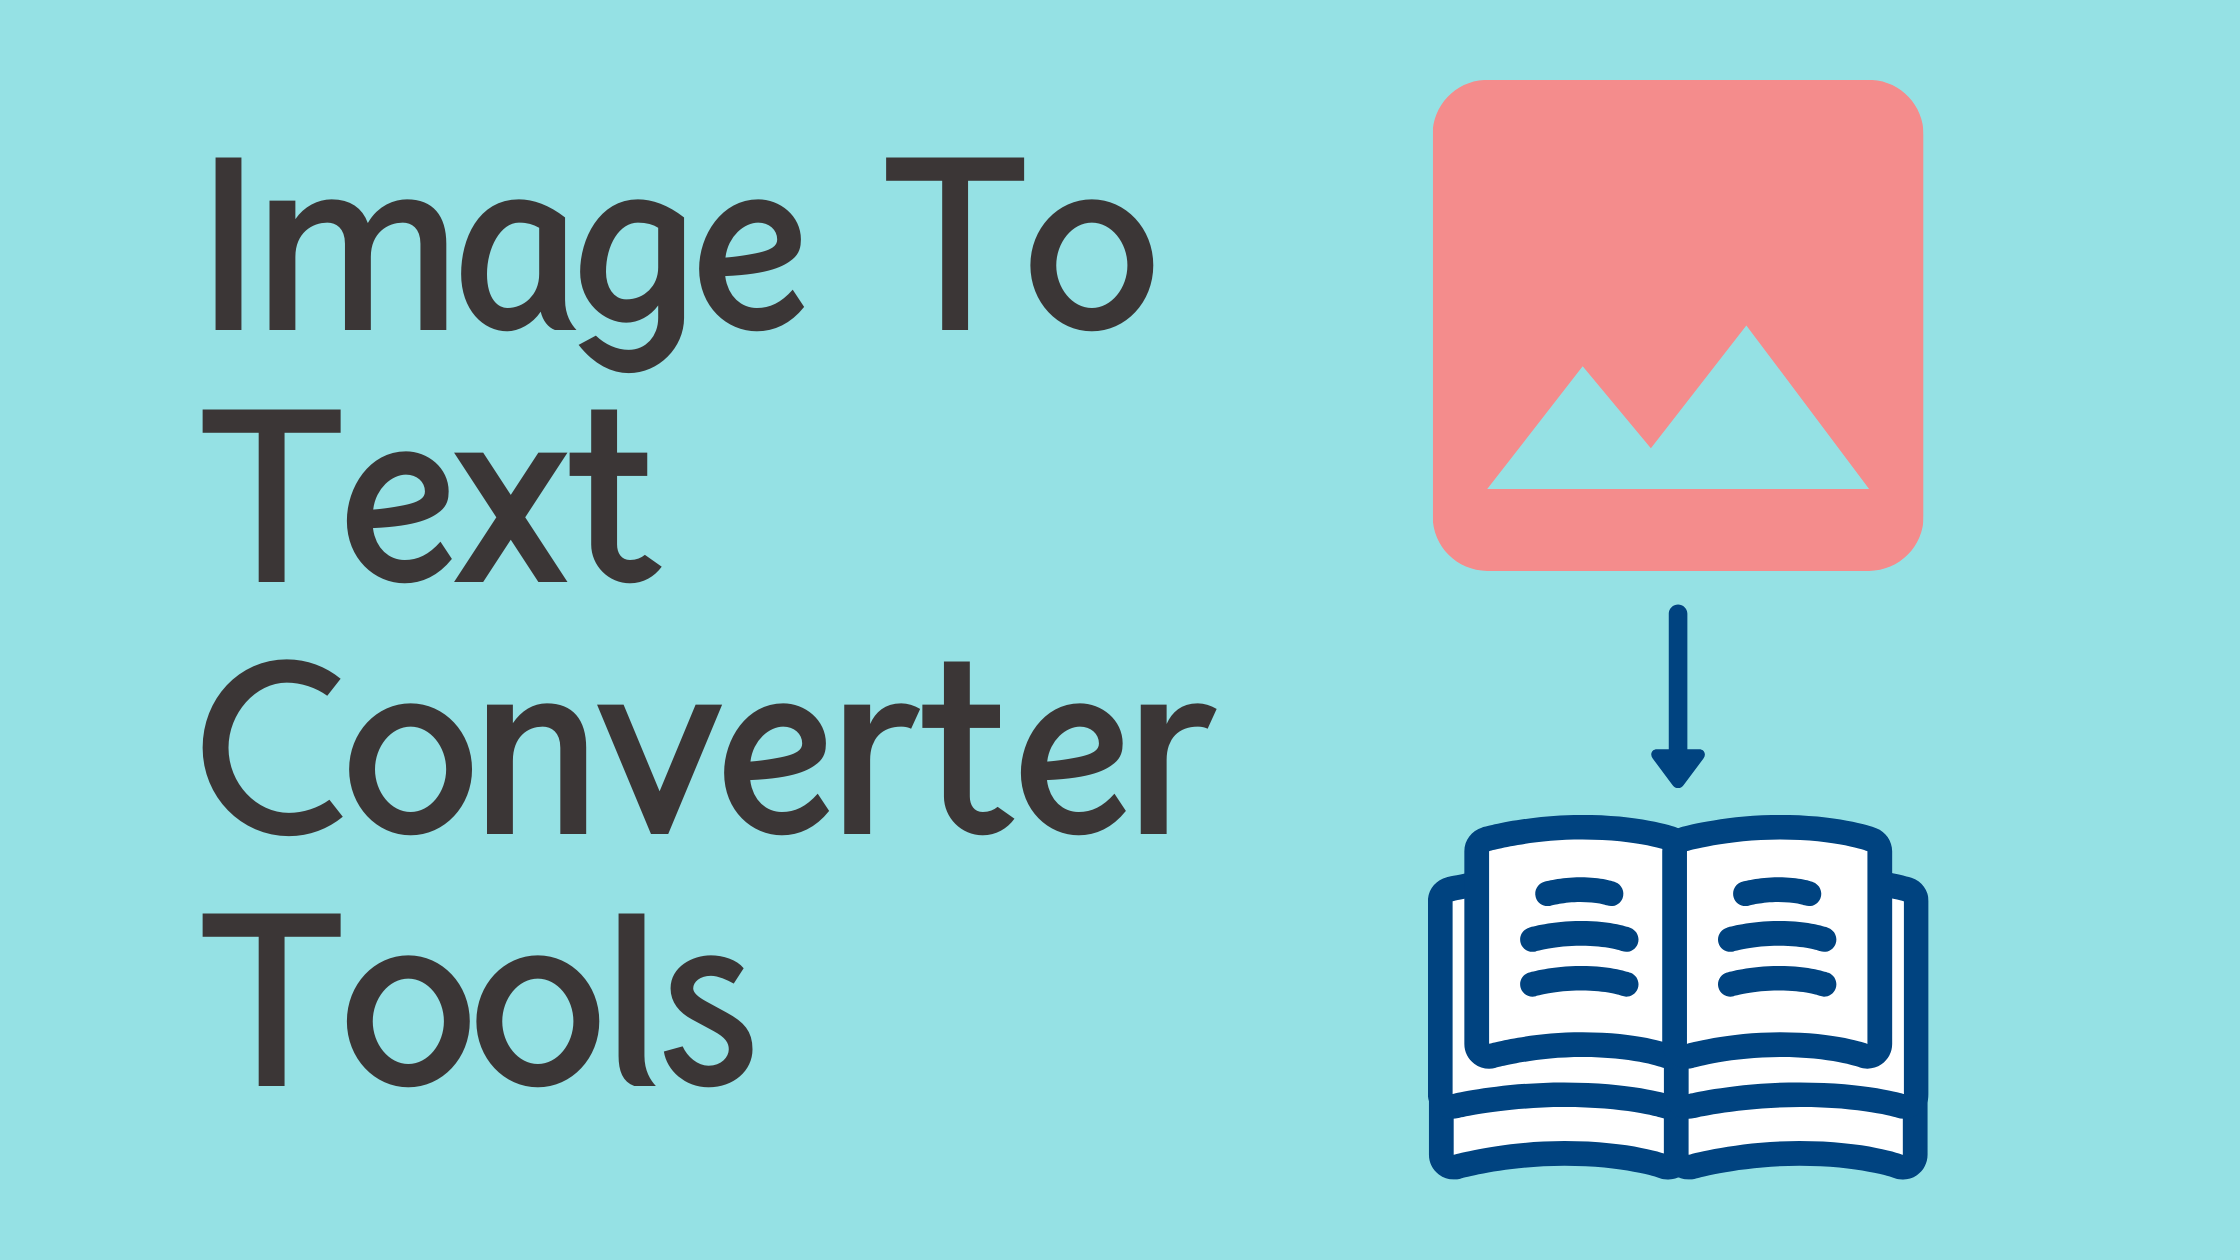 10 Best Image To Text Converter Tools to Use it in 2022